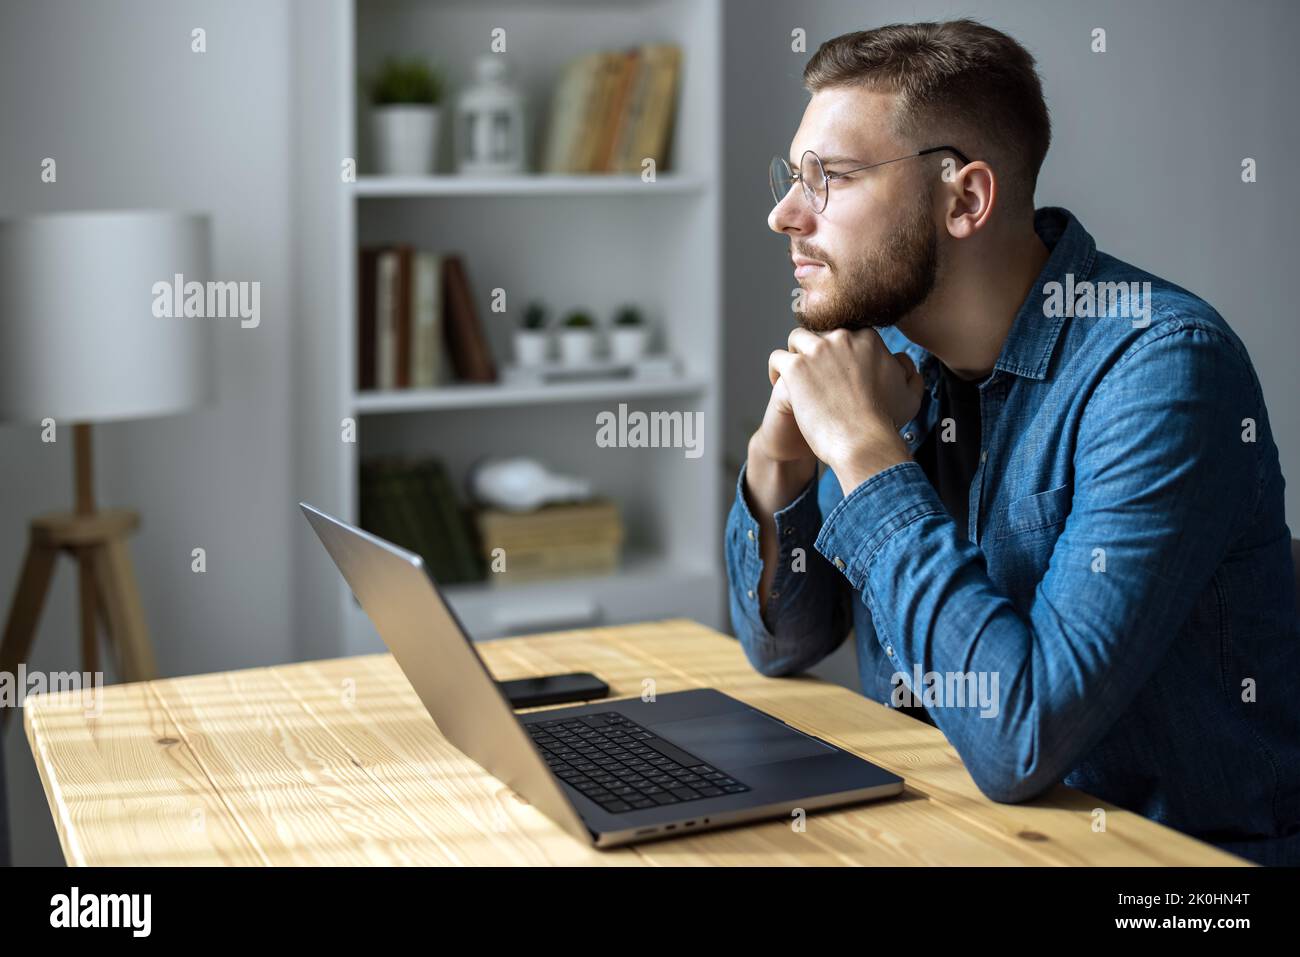 Thoughtful young man Stock Photo